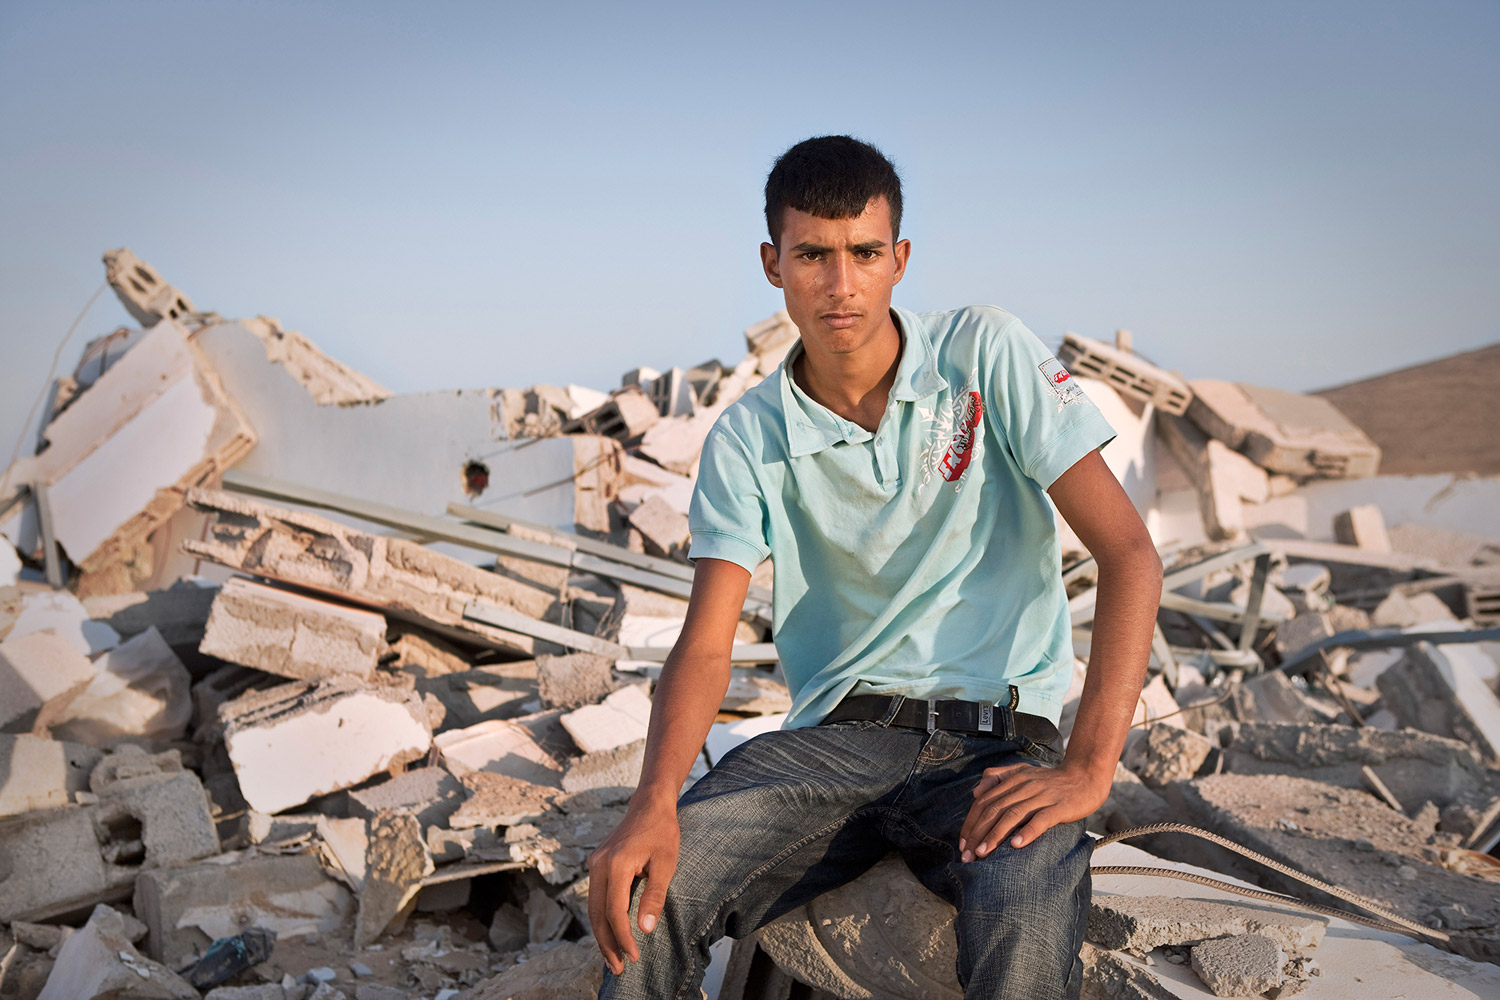 Sliman Khalil Al Dahabshe (18) sitting on the rubbles of his house in the village of Shkip. Sliman lives in one of 47 unrecognized Bedouin villages. The Israeli authorities destroyed his home defining it as an illegal structure, though his father served for many years in the Israeli army. Sliman’s family currently lives in a shed not being able to build a house fearing it would only be tore down again.